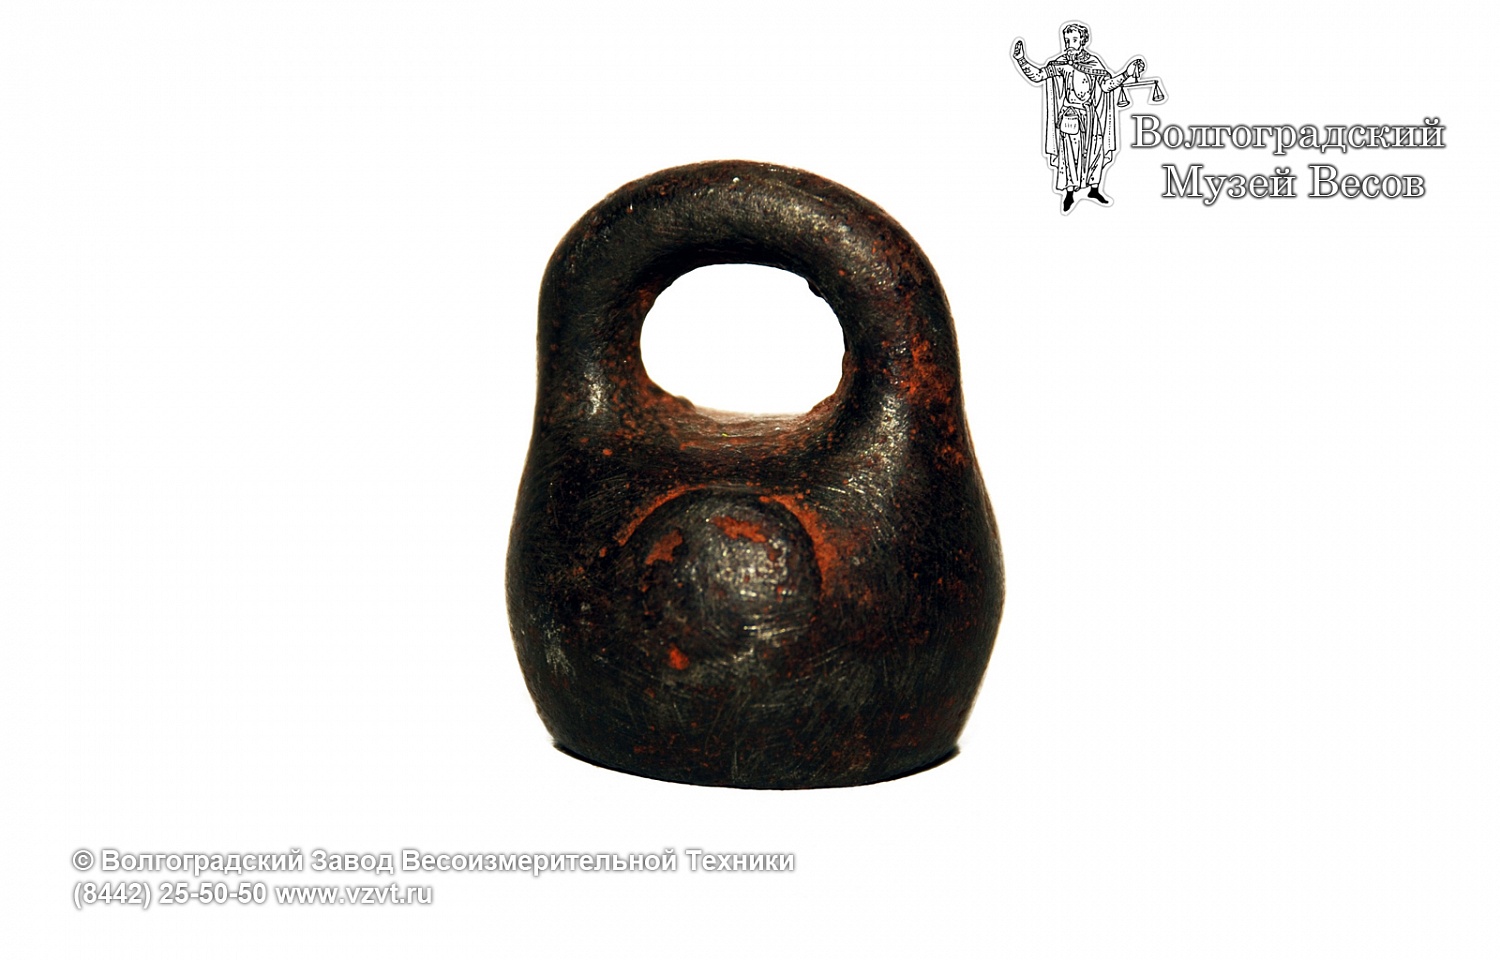 Cast-iron trade weight of 1/8 pound (eighth of a pound) nominal value. Russia, the late 19th – the early 20th centuries